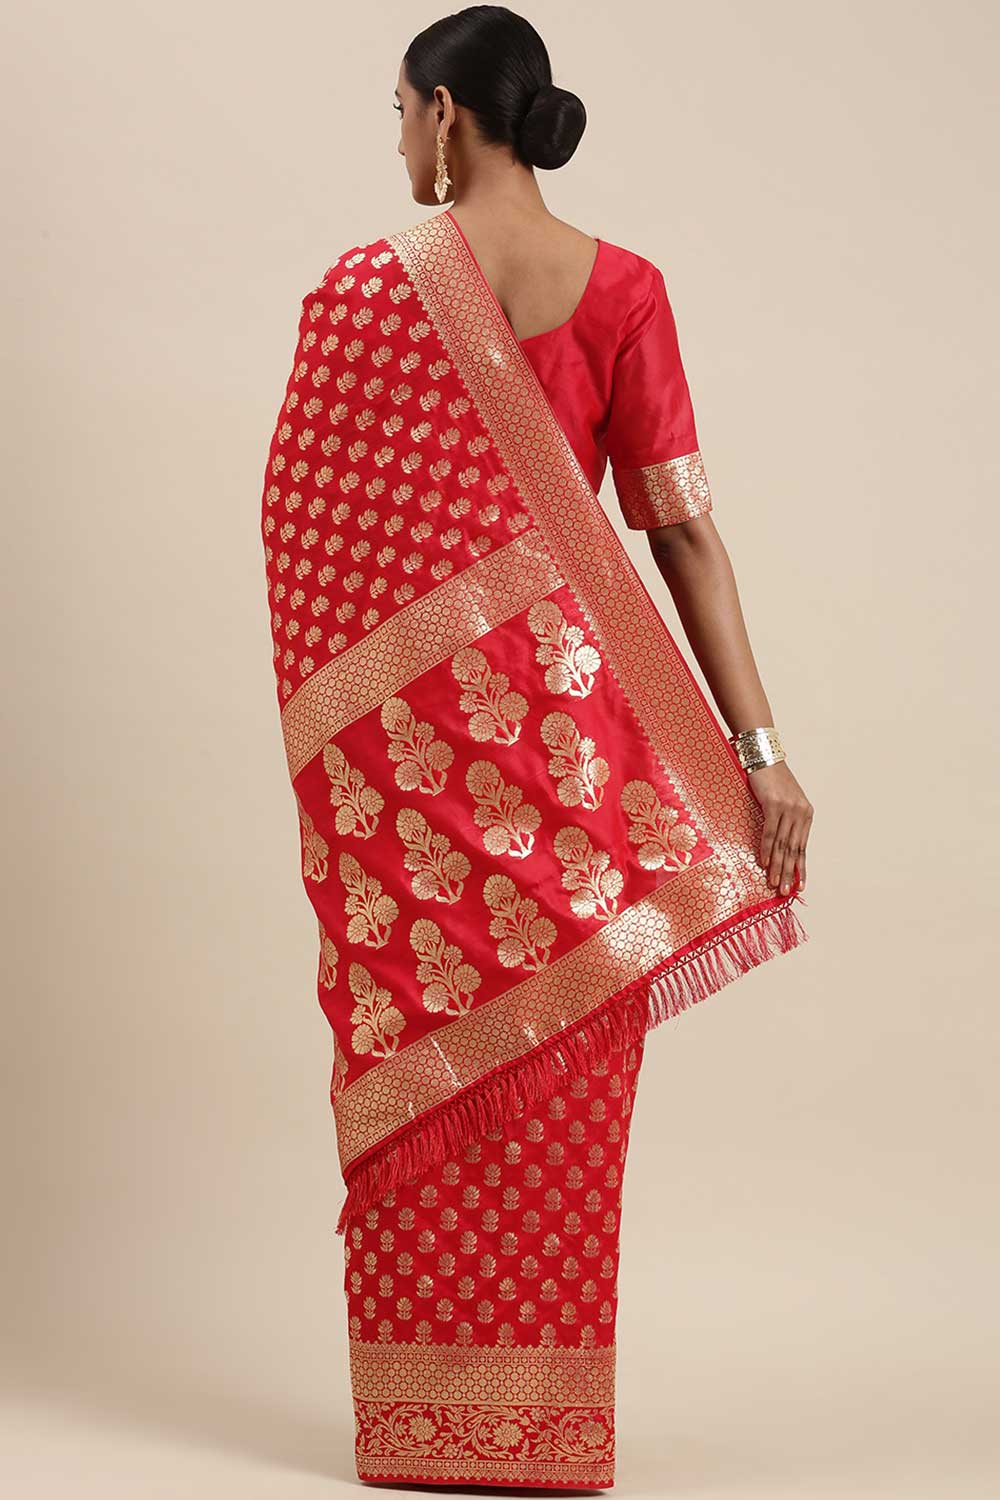 Shop Rihanna Red Floral Blended Silk One Minute Saree at best offer at our  Store - One Minute Saree